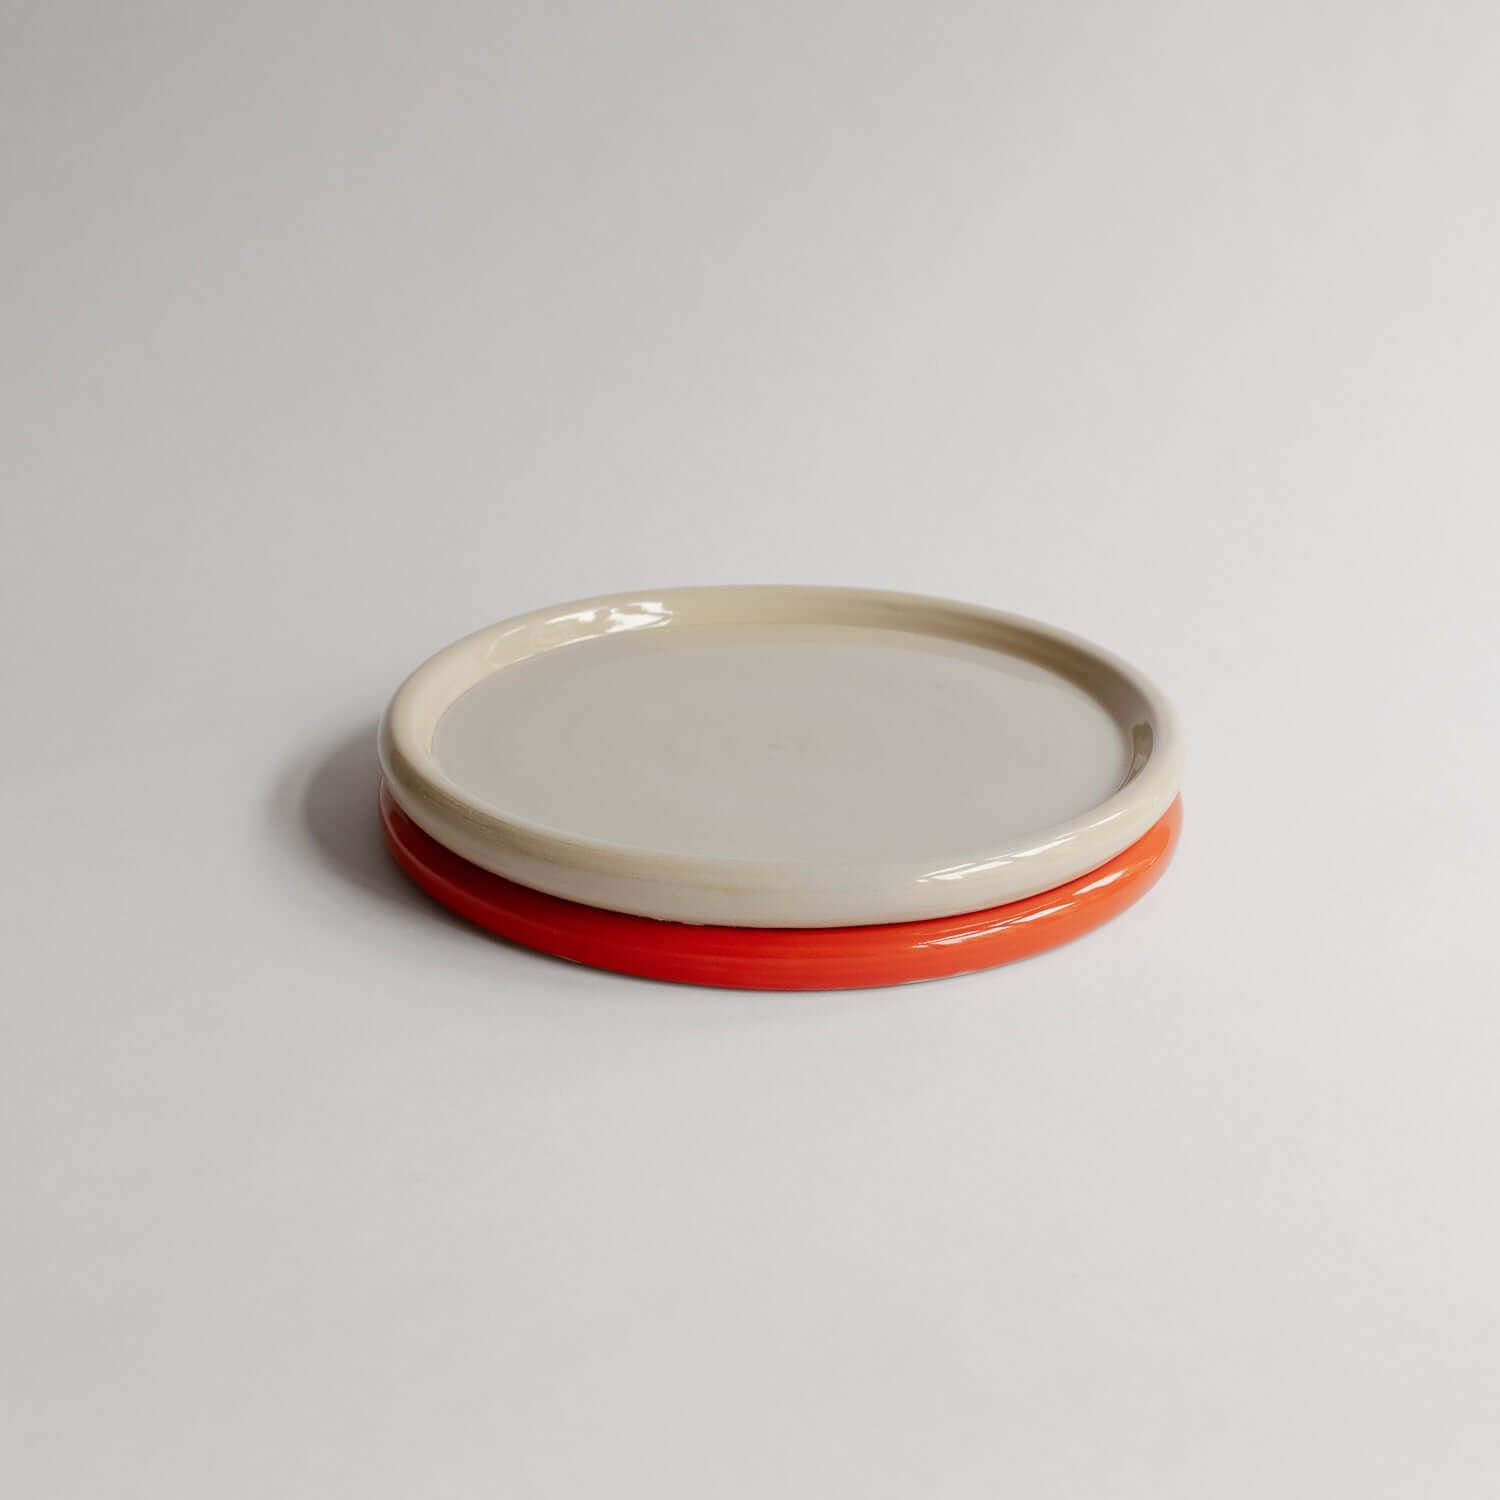 Elevate your dining with the Aleah Plate Set. Handmade red & creme ceramic plates with a 19cm diameter, perfect for lively table settings. Shop now! von viola beuscher ceramics